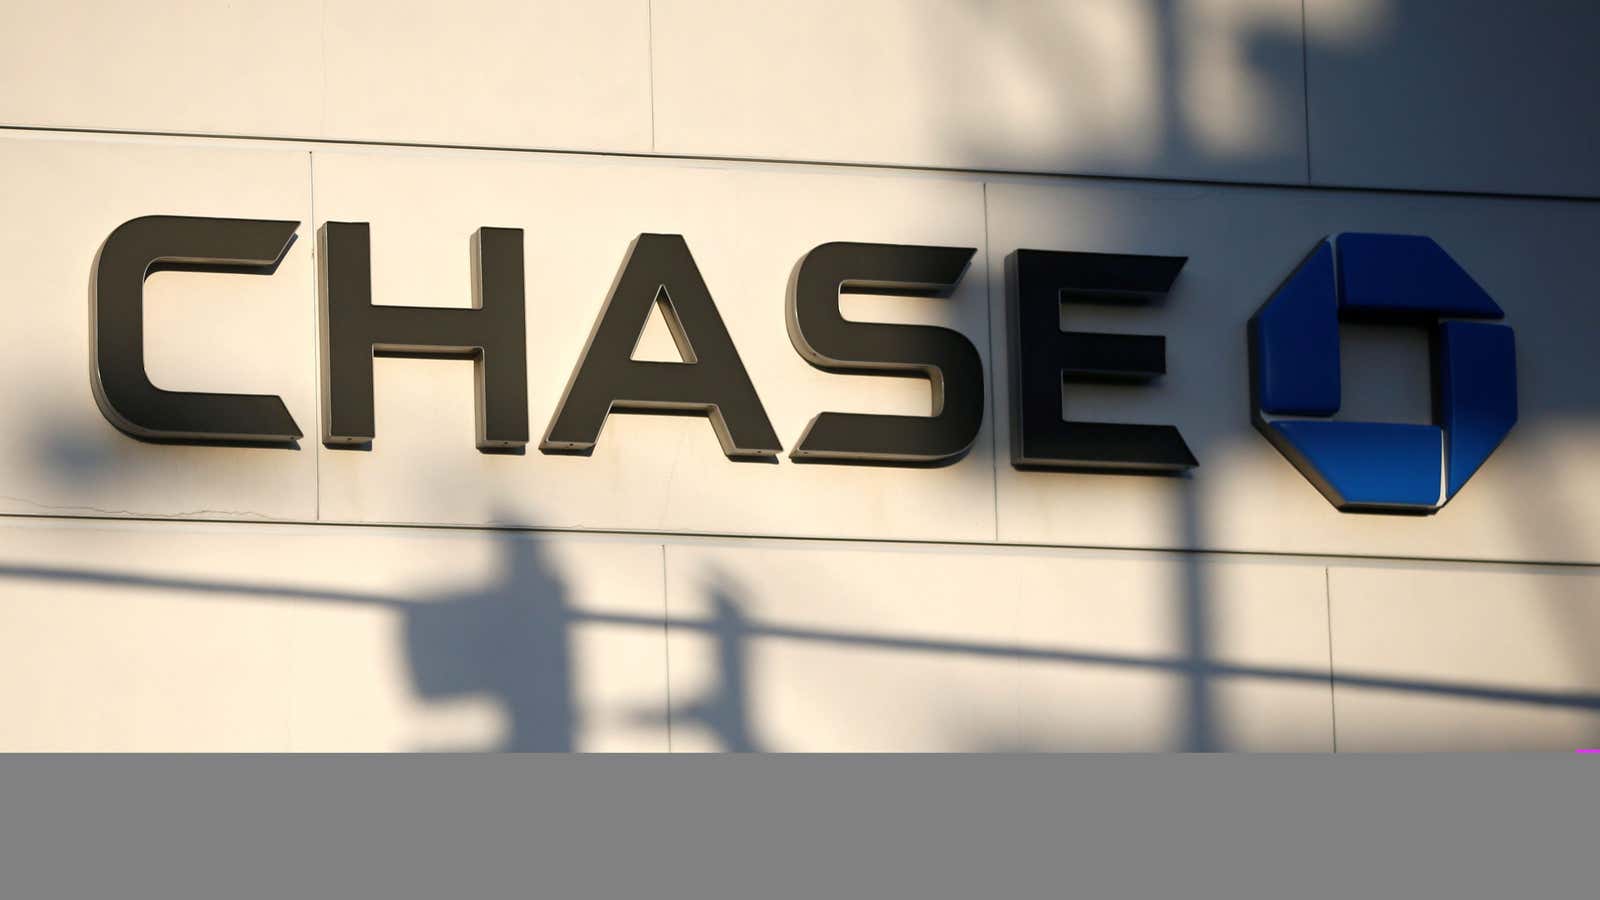 Chase paid customers back $50 million after a CFPB action.